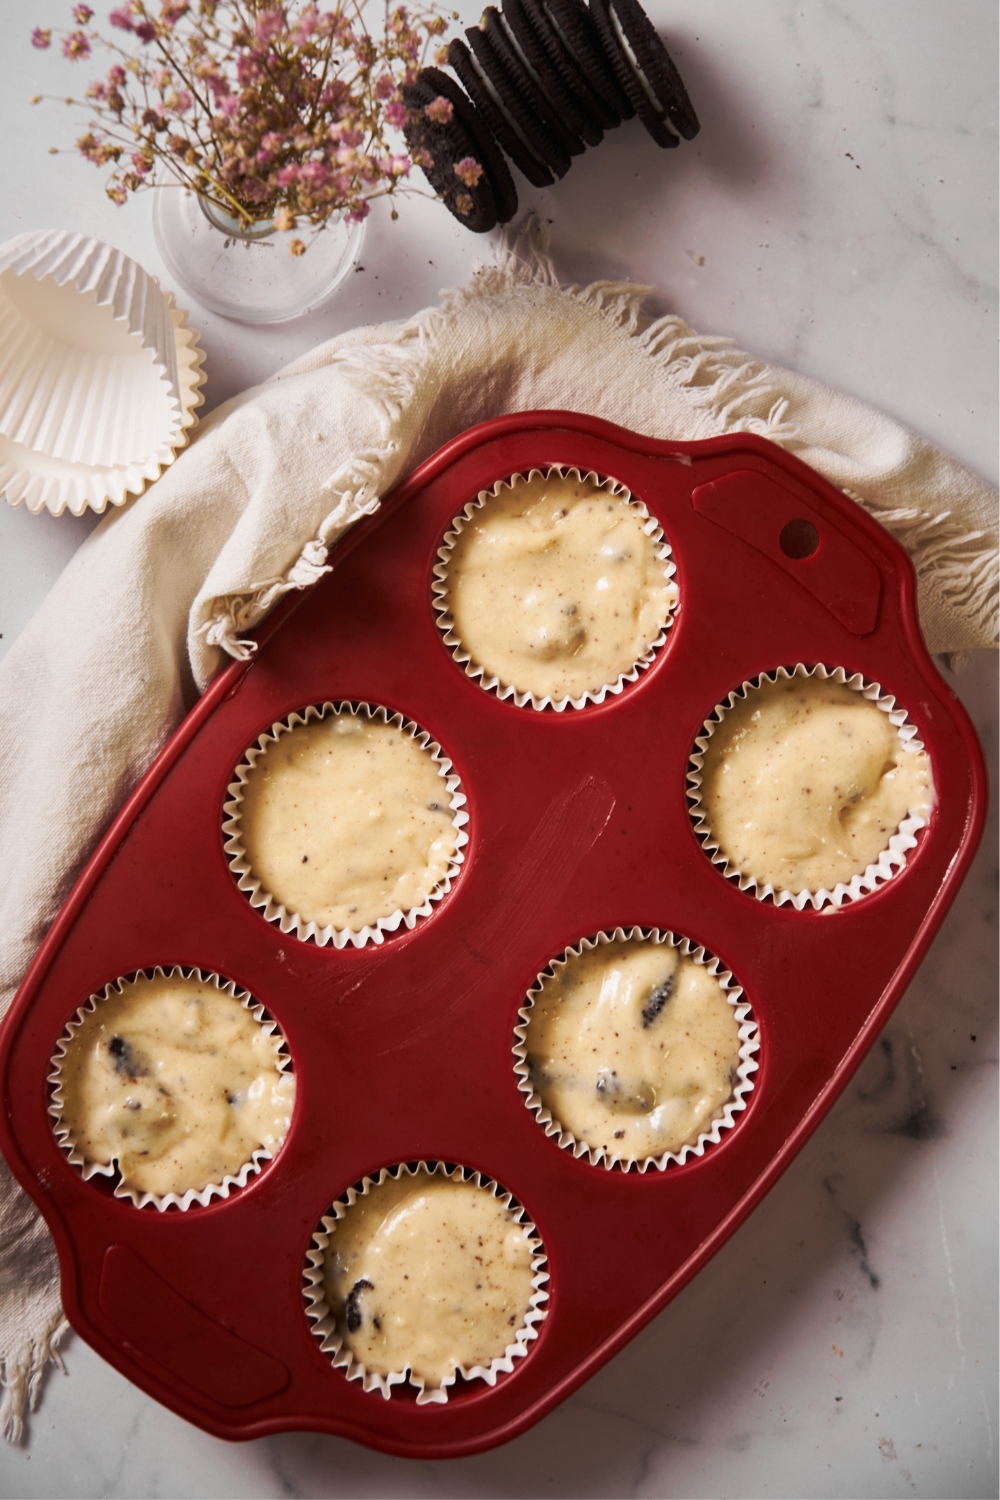 Six unbaked cupcakes in a red cupcake tray.